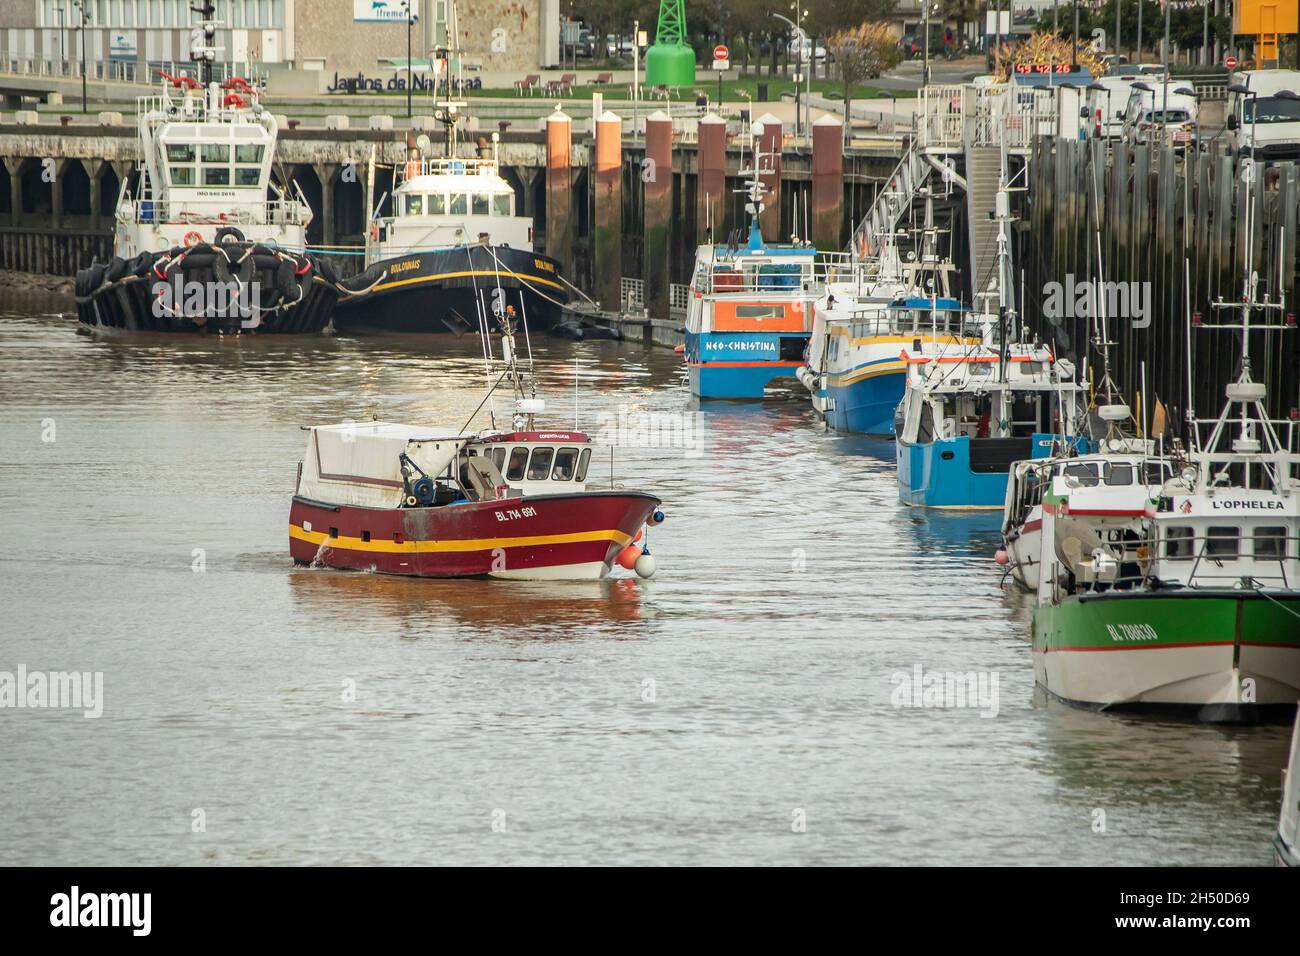 211105) -- PARIS, Nov. 5, 2021 (Xinhua) -- Fishing boats are seen early  morning in Boulogne-sur-Mer, Hauts-de-France, a coastal city in northern  France, Nov. 5, 2021. Britain's Brexit Minister David Frost and